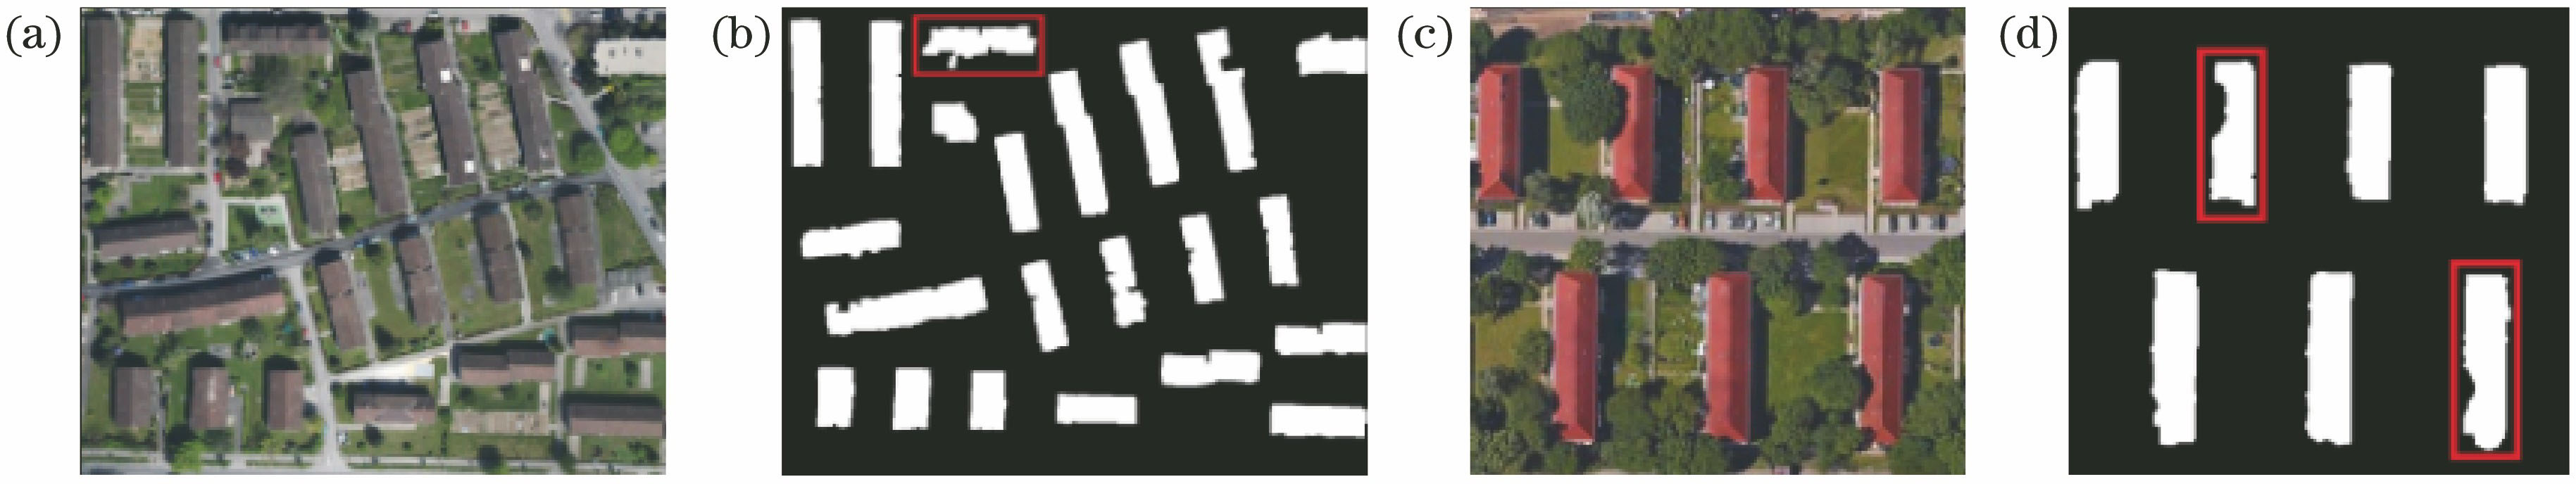 Initial results of buildings extracted by shifted shadow analysis. (a) Original remote sensing image A; (b) initial result of building A; (c) original remote sensing image B; (d) initial result of building B